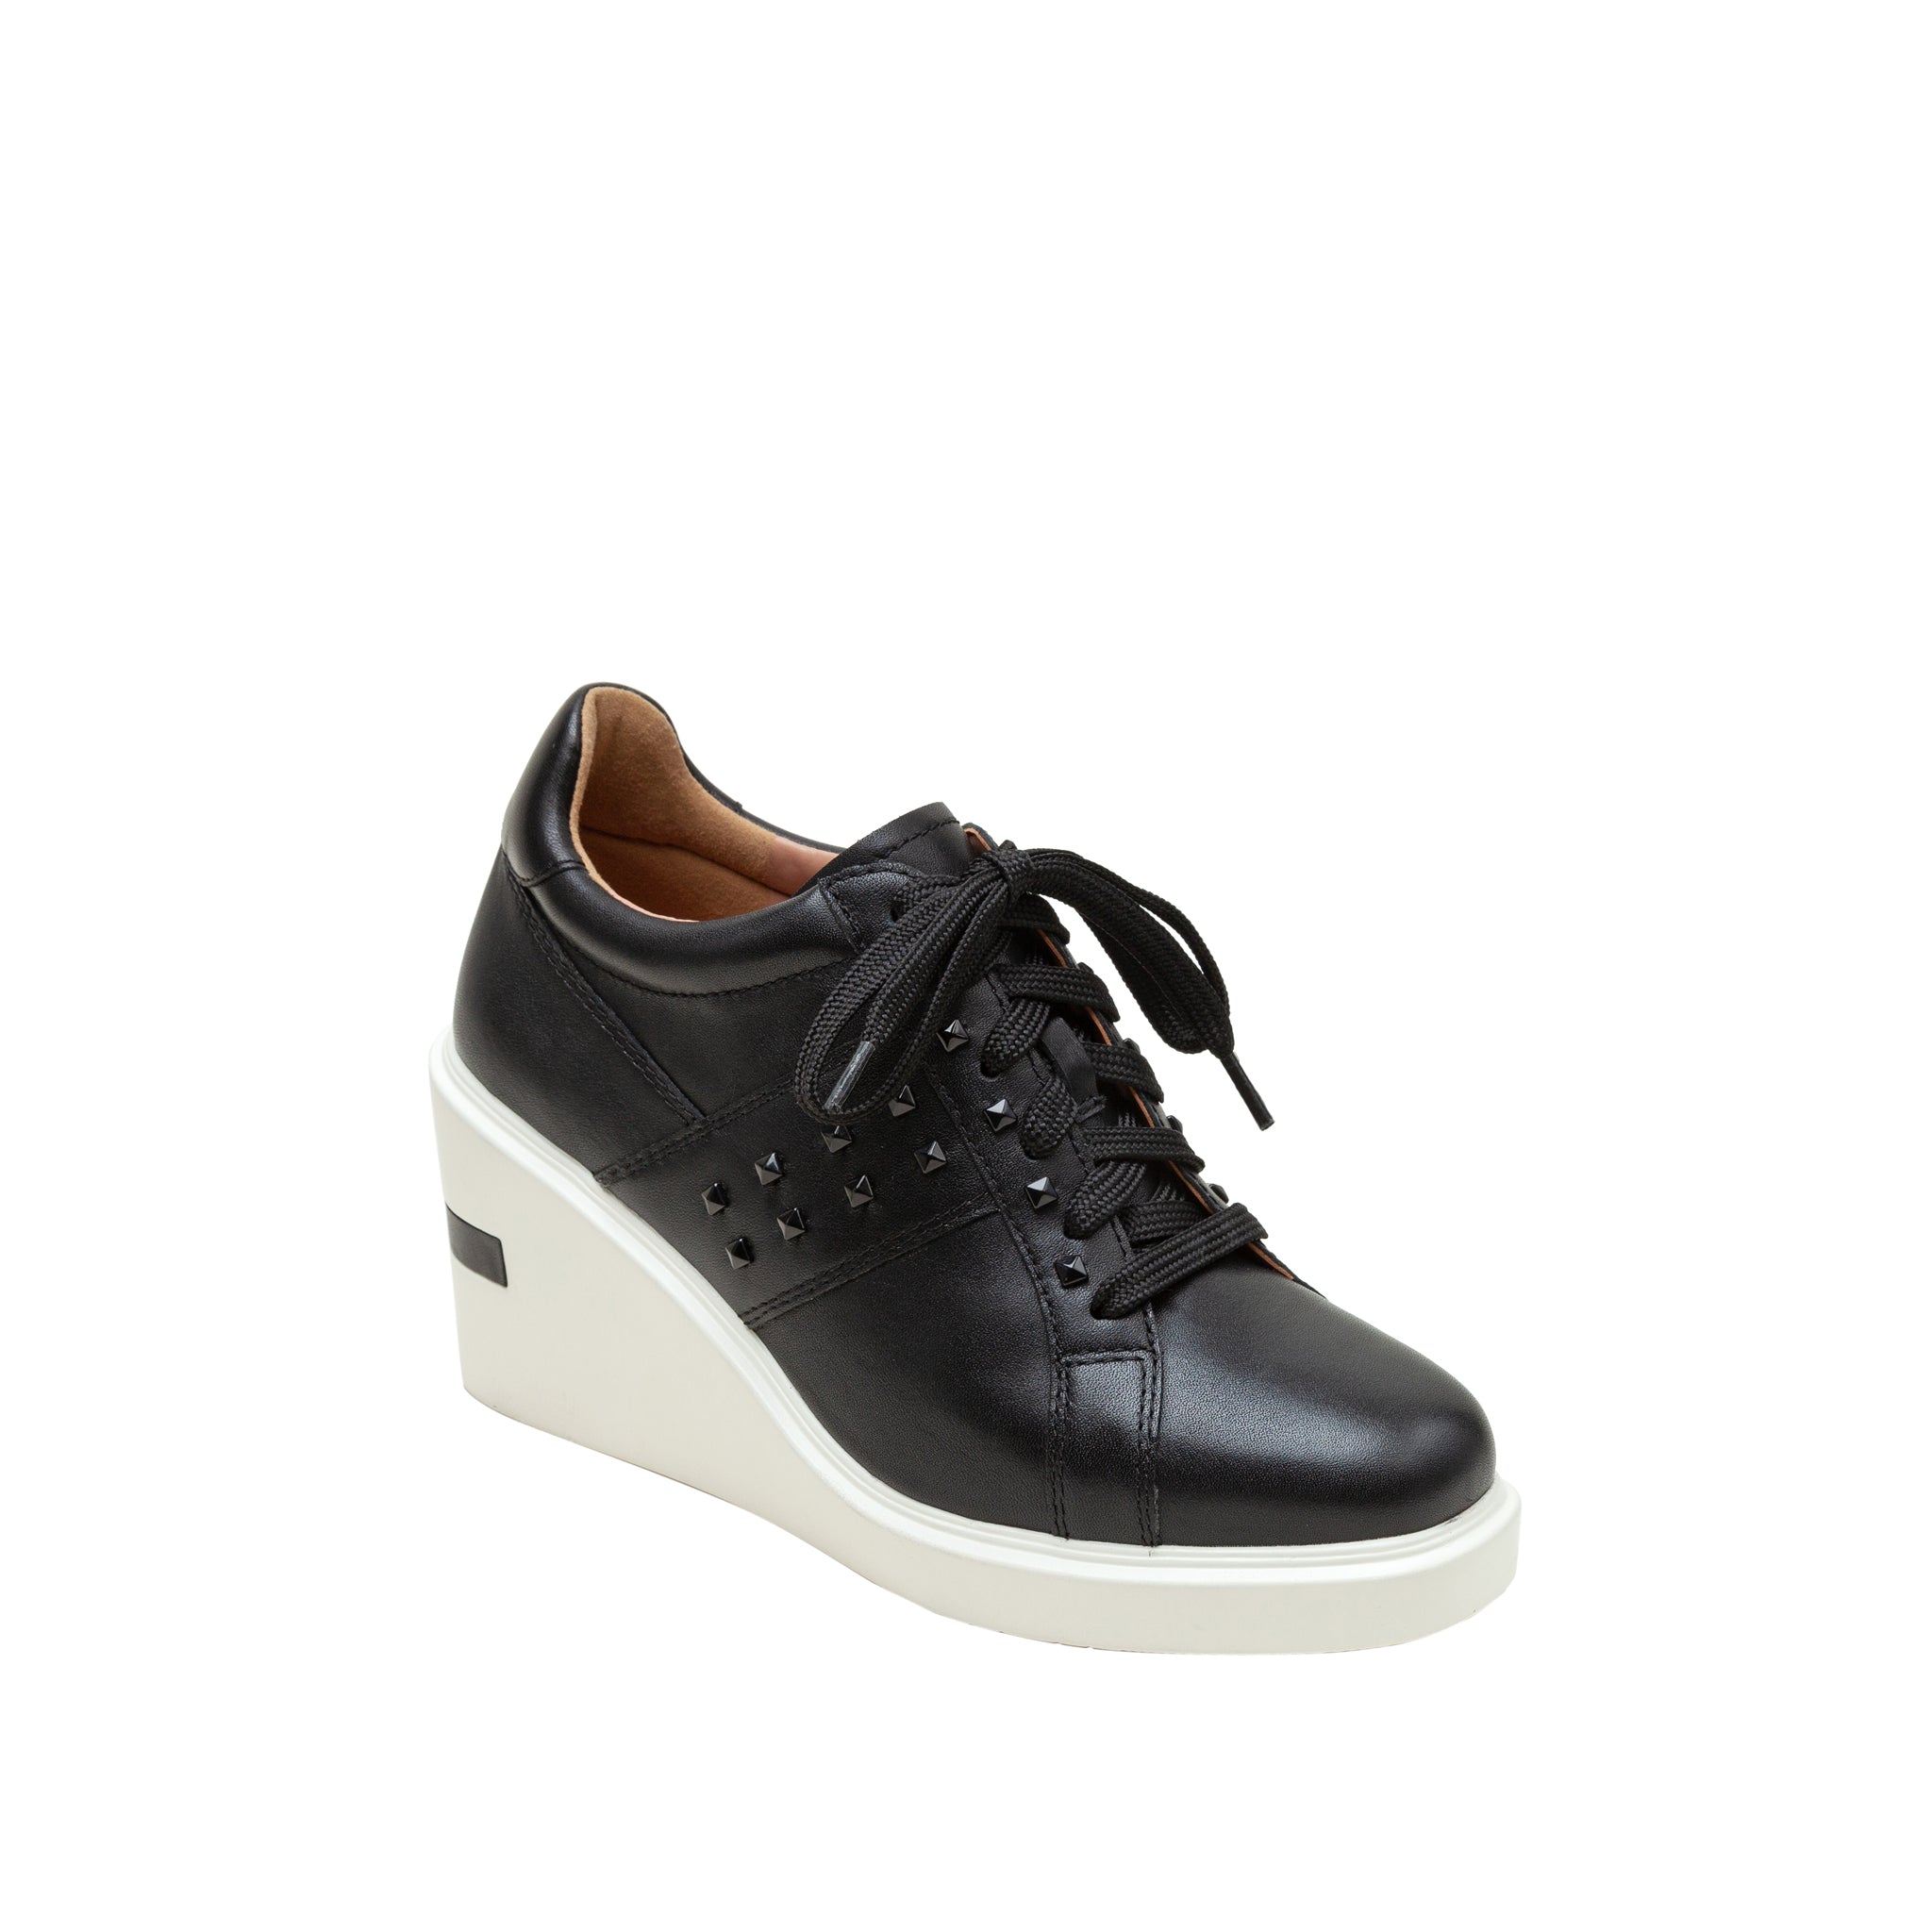 Buy Green Lace Tie-up Sneaker Wedges by Tiesta Online at Aza Fashions.